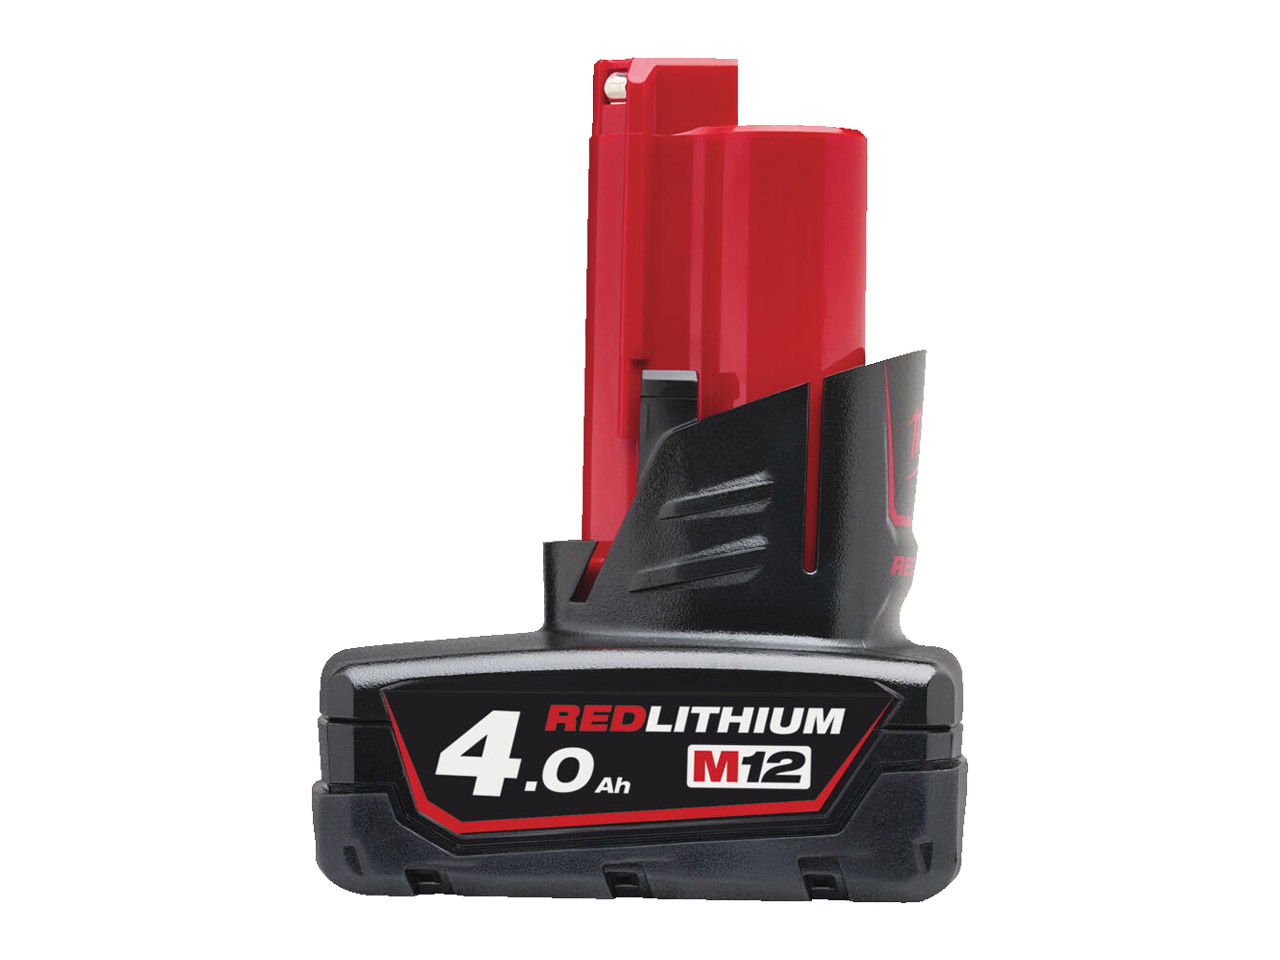 Milwaukee M12B4 M12 Fuel Red Lithium Ion 4.0Ah Battery